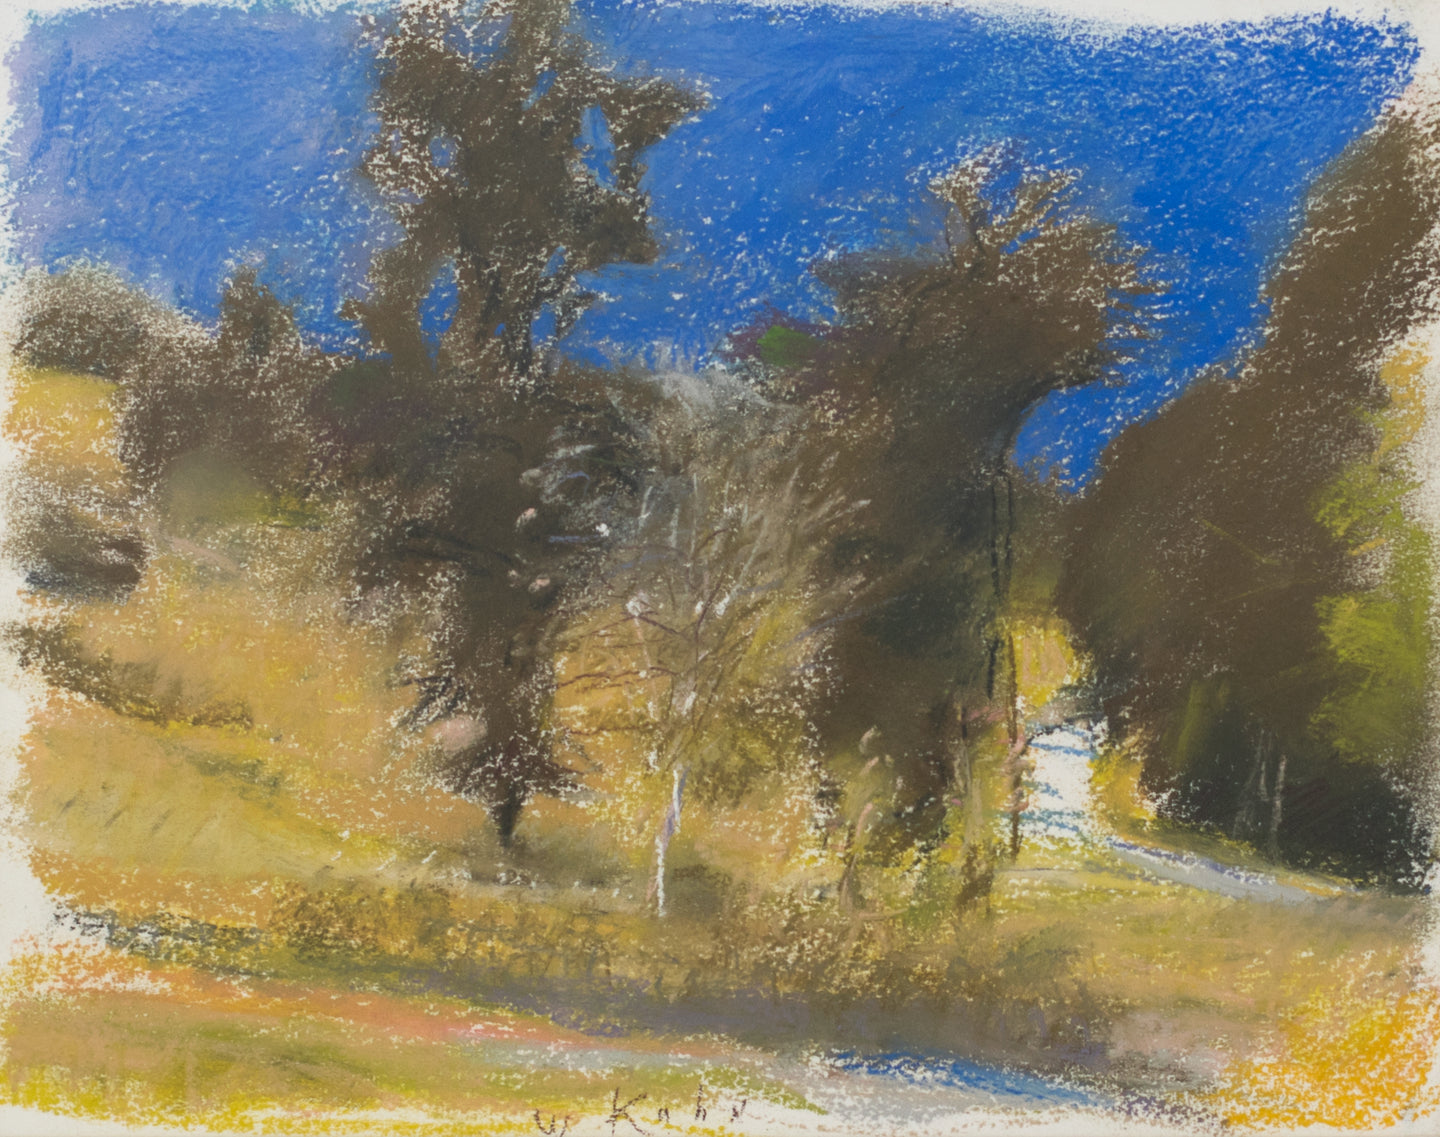 Wolf Kahn  The Start of Covey Road, 2000  Pastel on paper  11 x 14 inches This landscape has a royal blue sky, juxtaposing the olive and greens of the trees. Kahn weaves purples and oranges onto the green of the grass. Available at Manolis Projects Gallery.